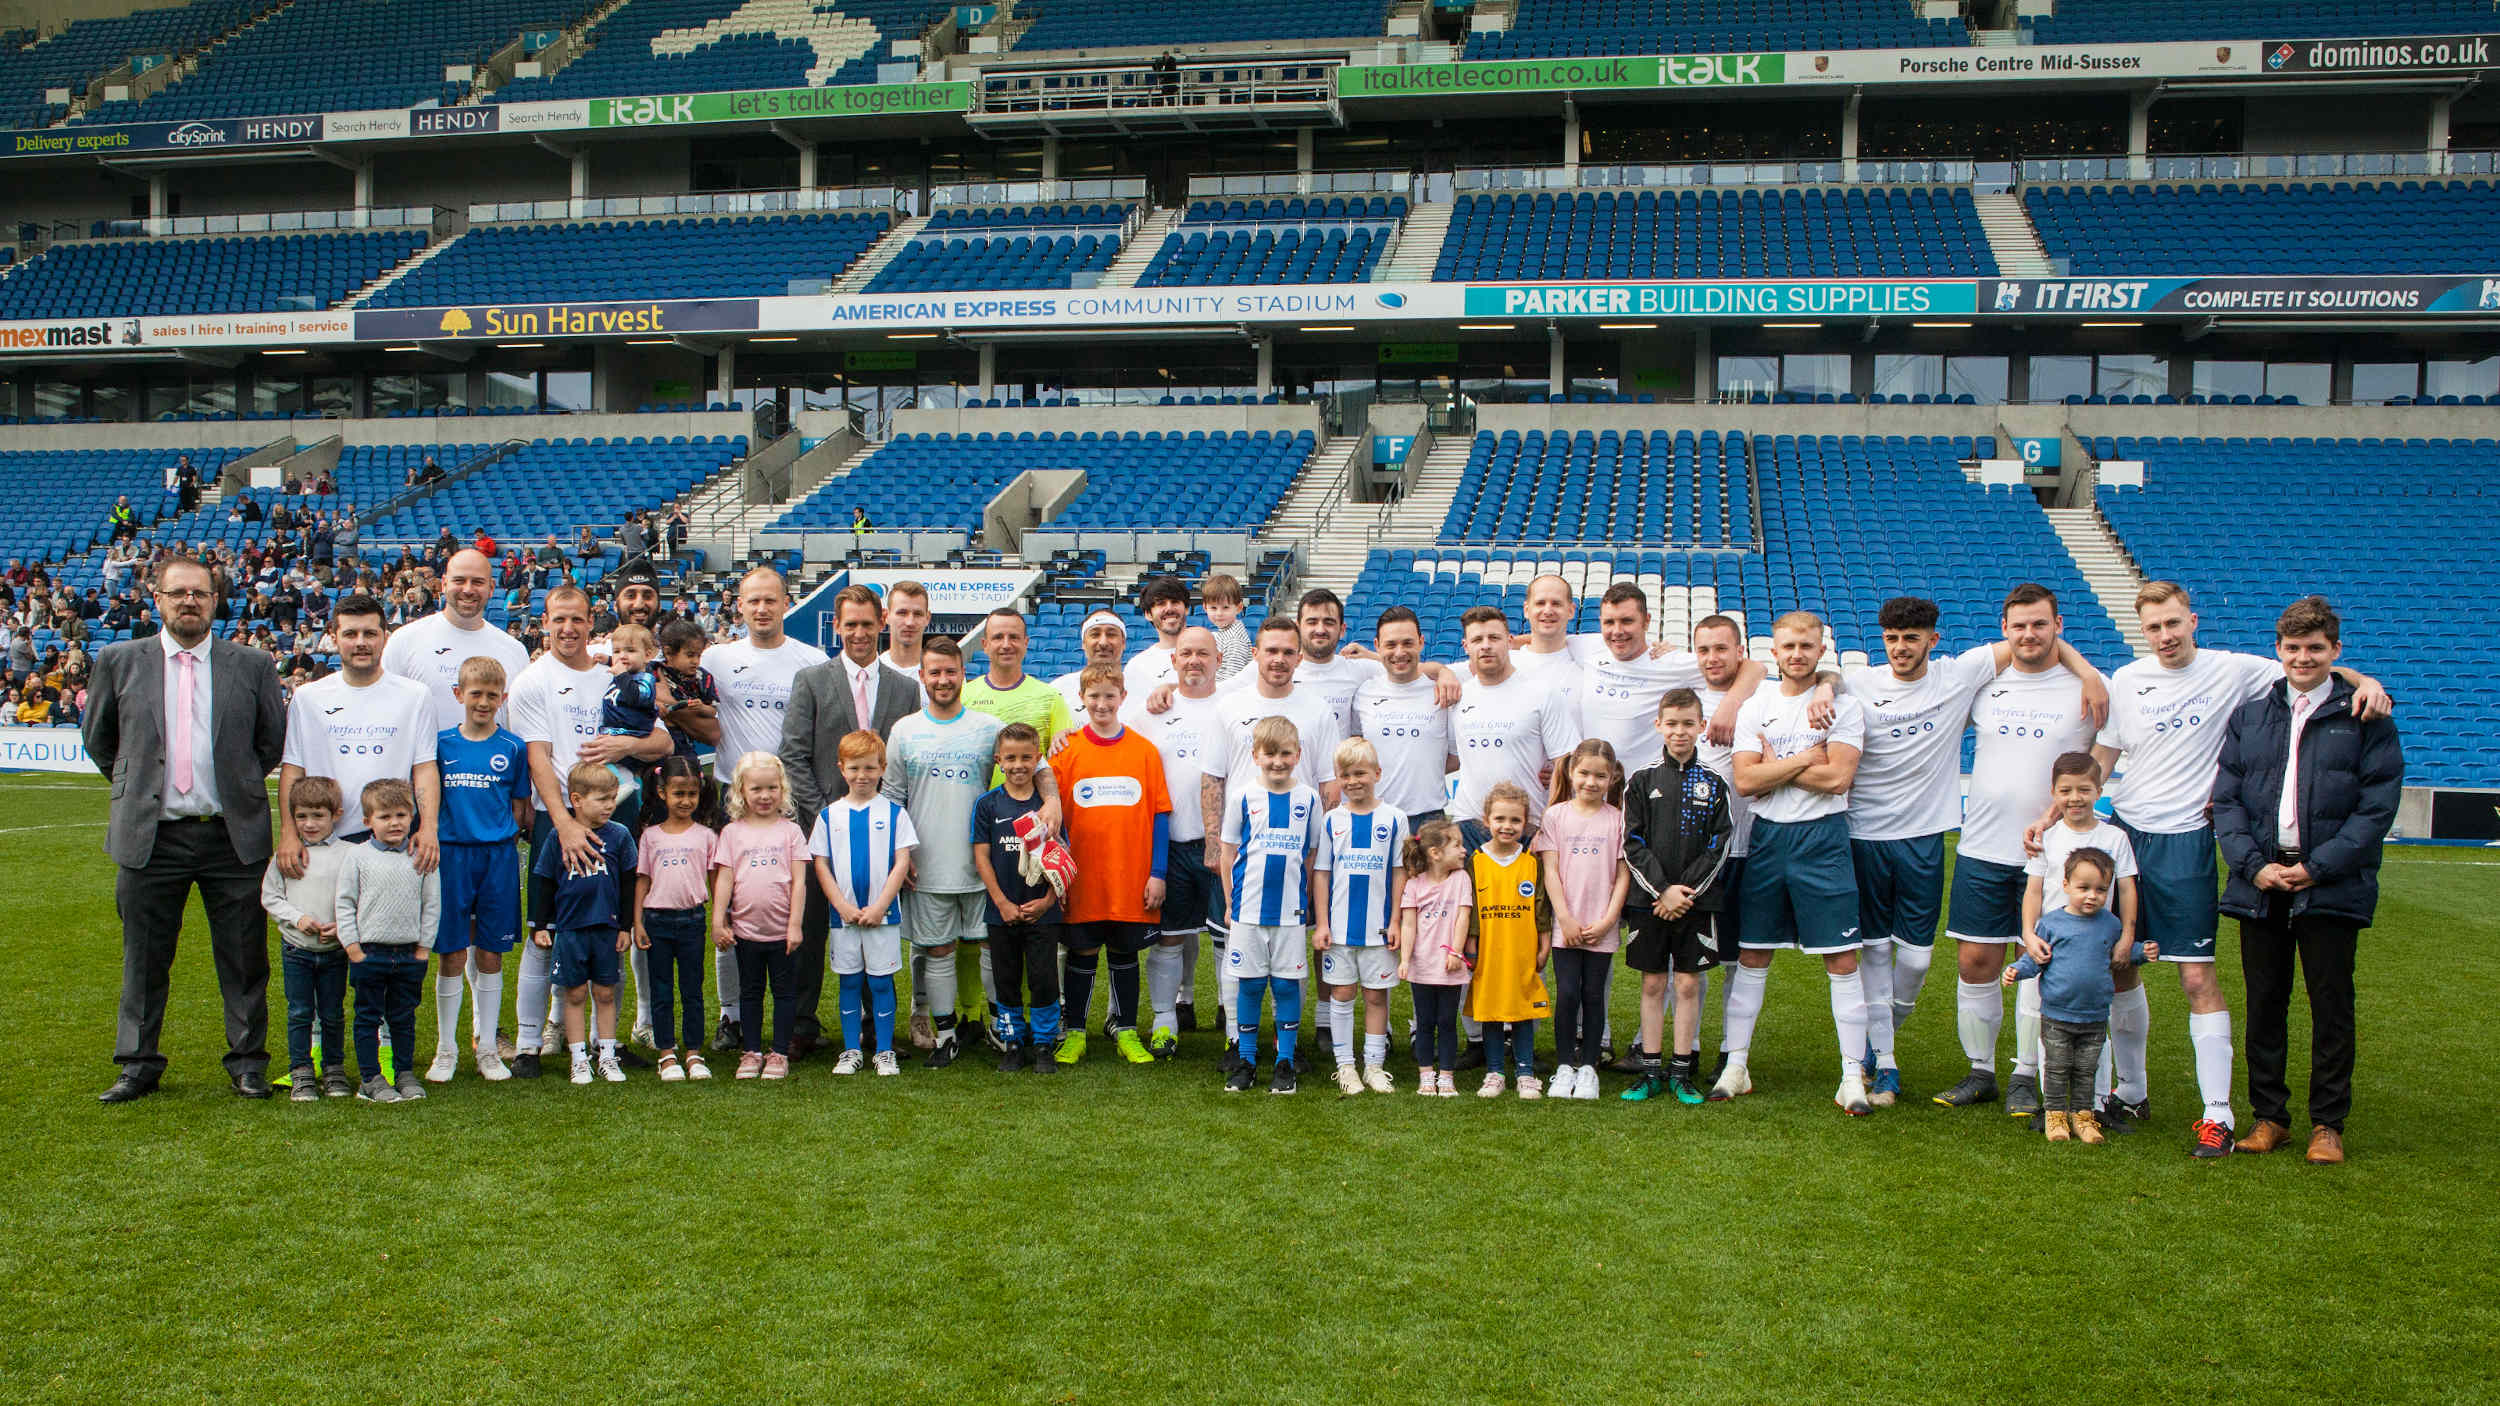 Cancer research charity football match